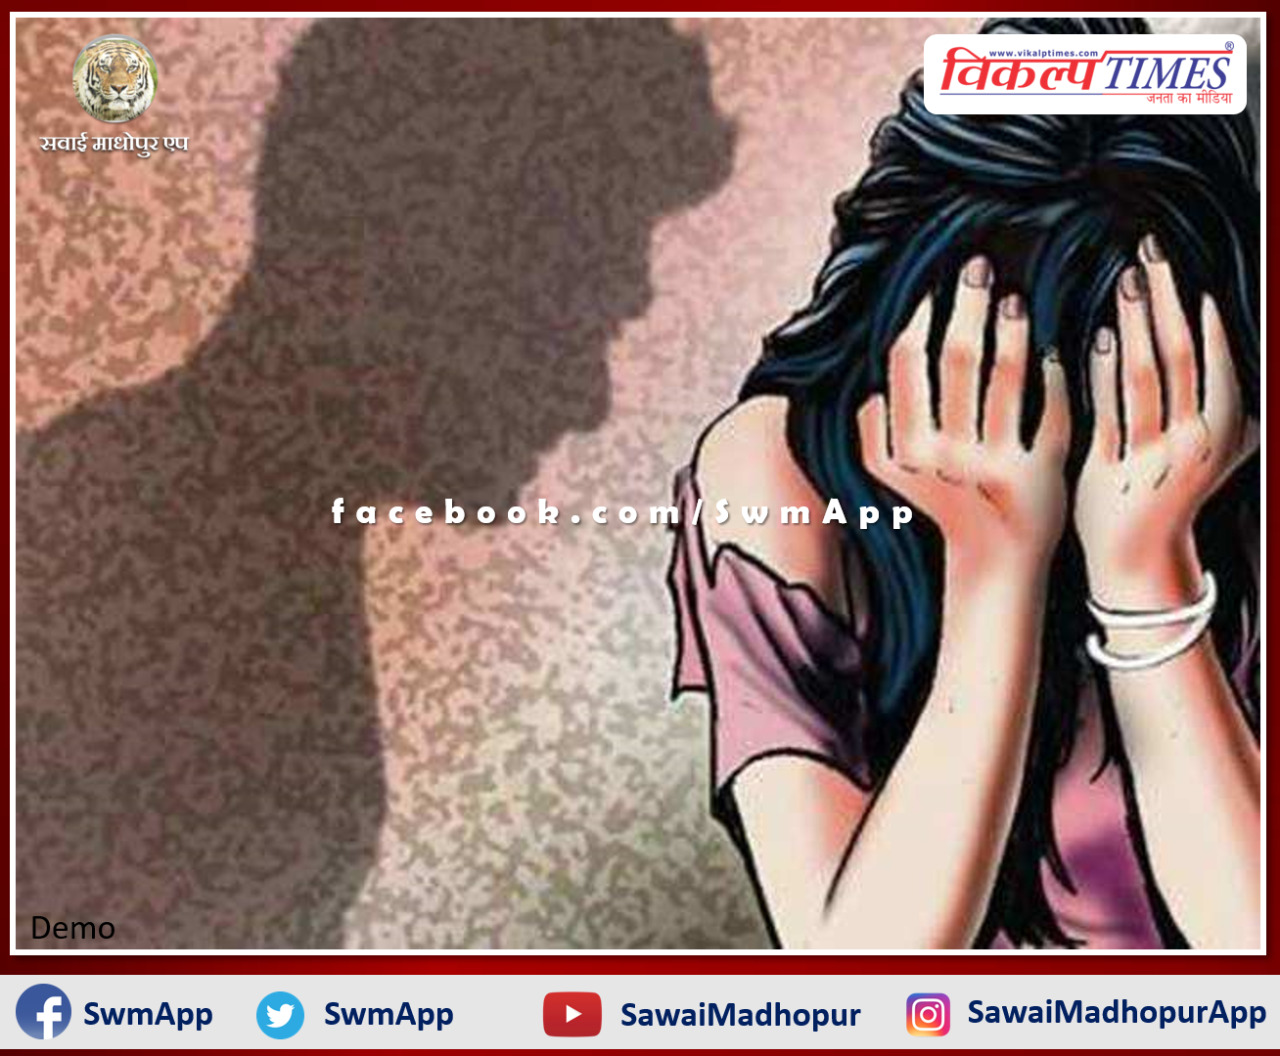 Relative entered the house and raped a 4-year-old girl in jalor rajasthan